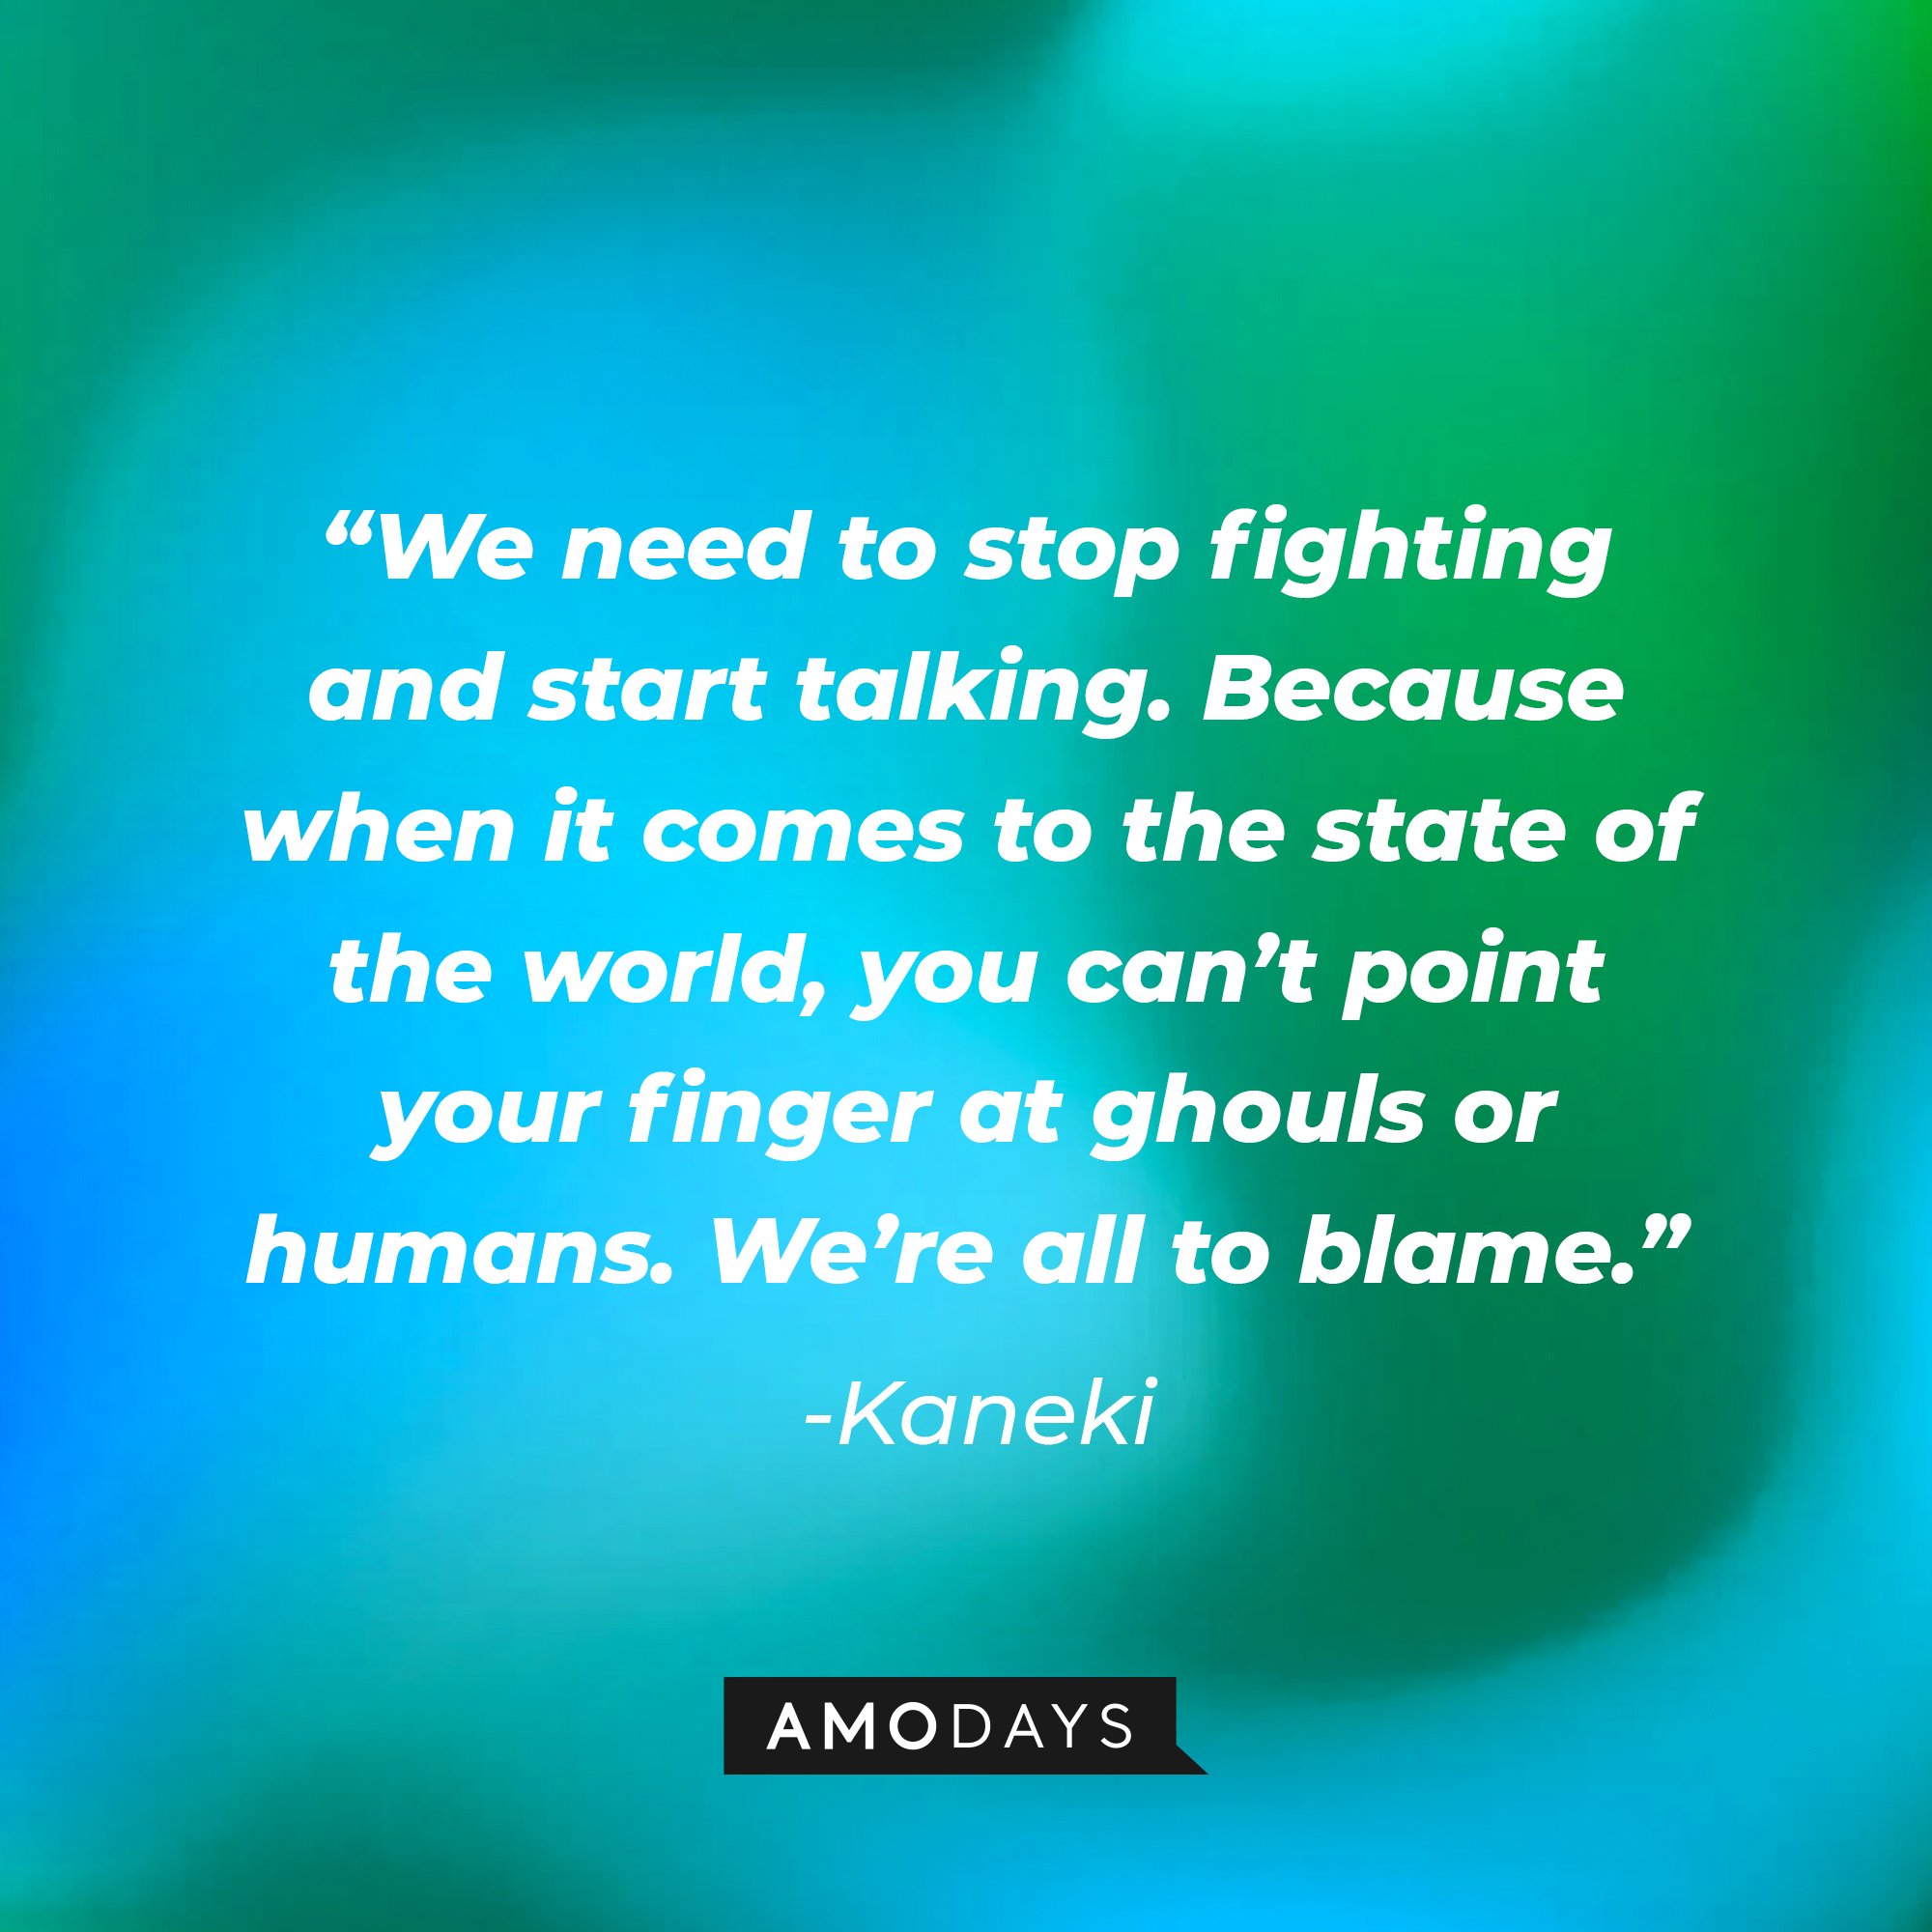 Kaneki's quote: “We need to stop fighting and start talking. Because when it comes to the state of the world, you can’t point your finger at ghouls or humans. We’re all to blame.” | Image: AmoDays